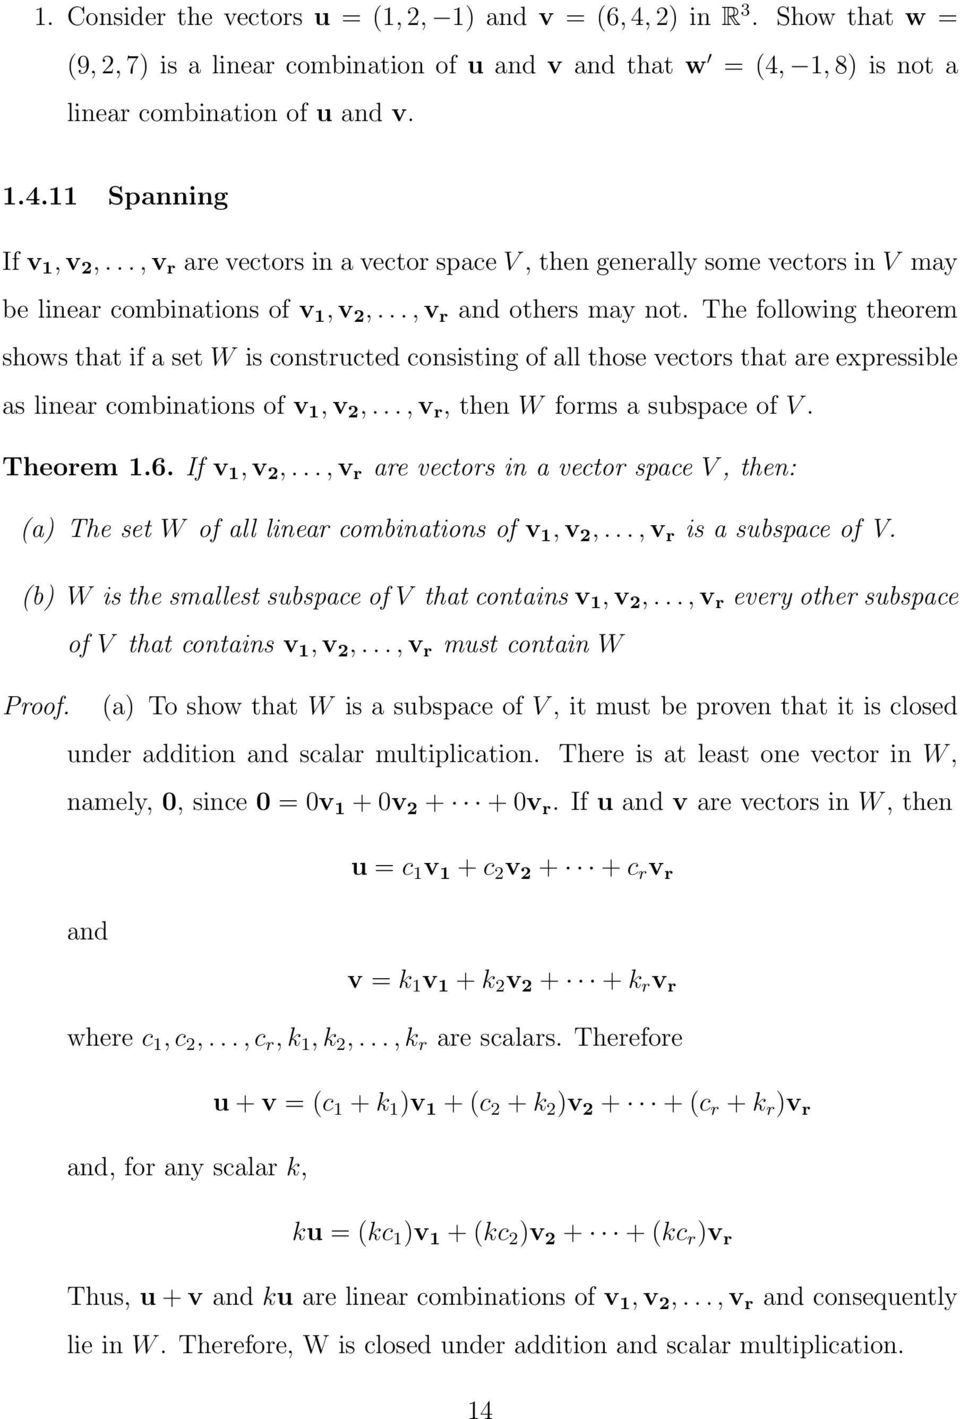 The following theorem shows that if a set W is constructed consisting of all those vectors that are expressible as linear combinations of v 1, v 2,..., v r, then W forms a subspace of V. Theorem 1.6.